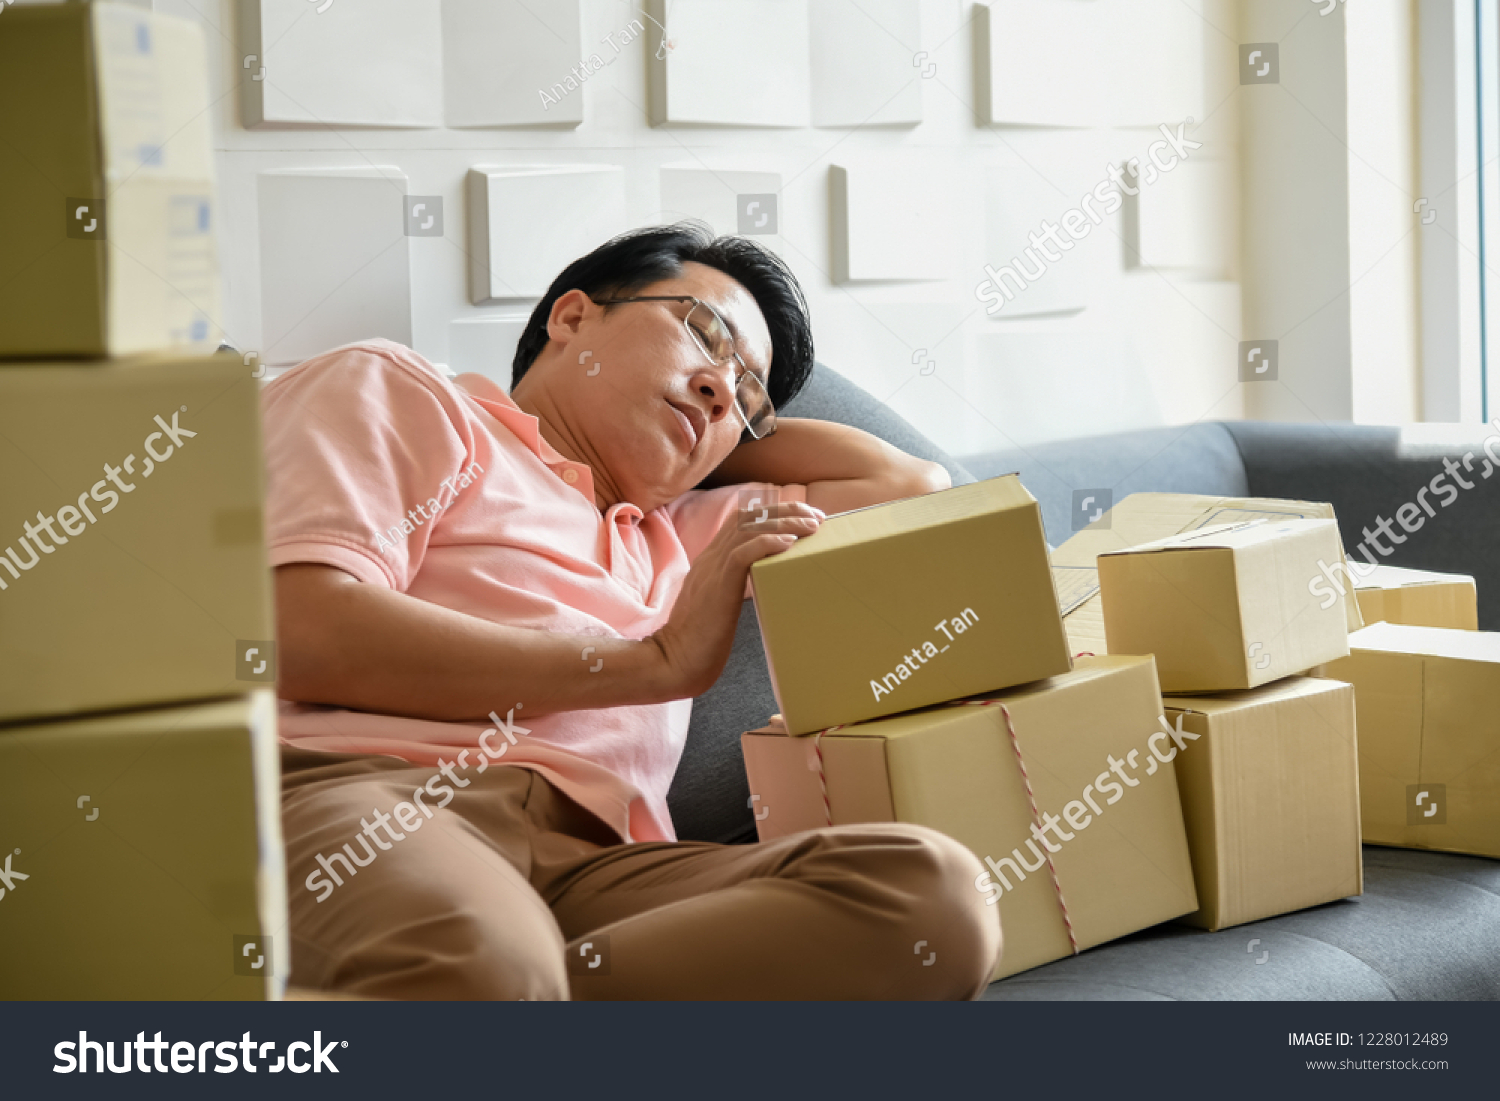 Asian men are falling asleep Because to tired of handling the order-based goods from online customers, which there are many, to SME concept. #1228012489